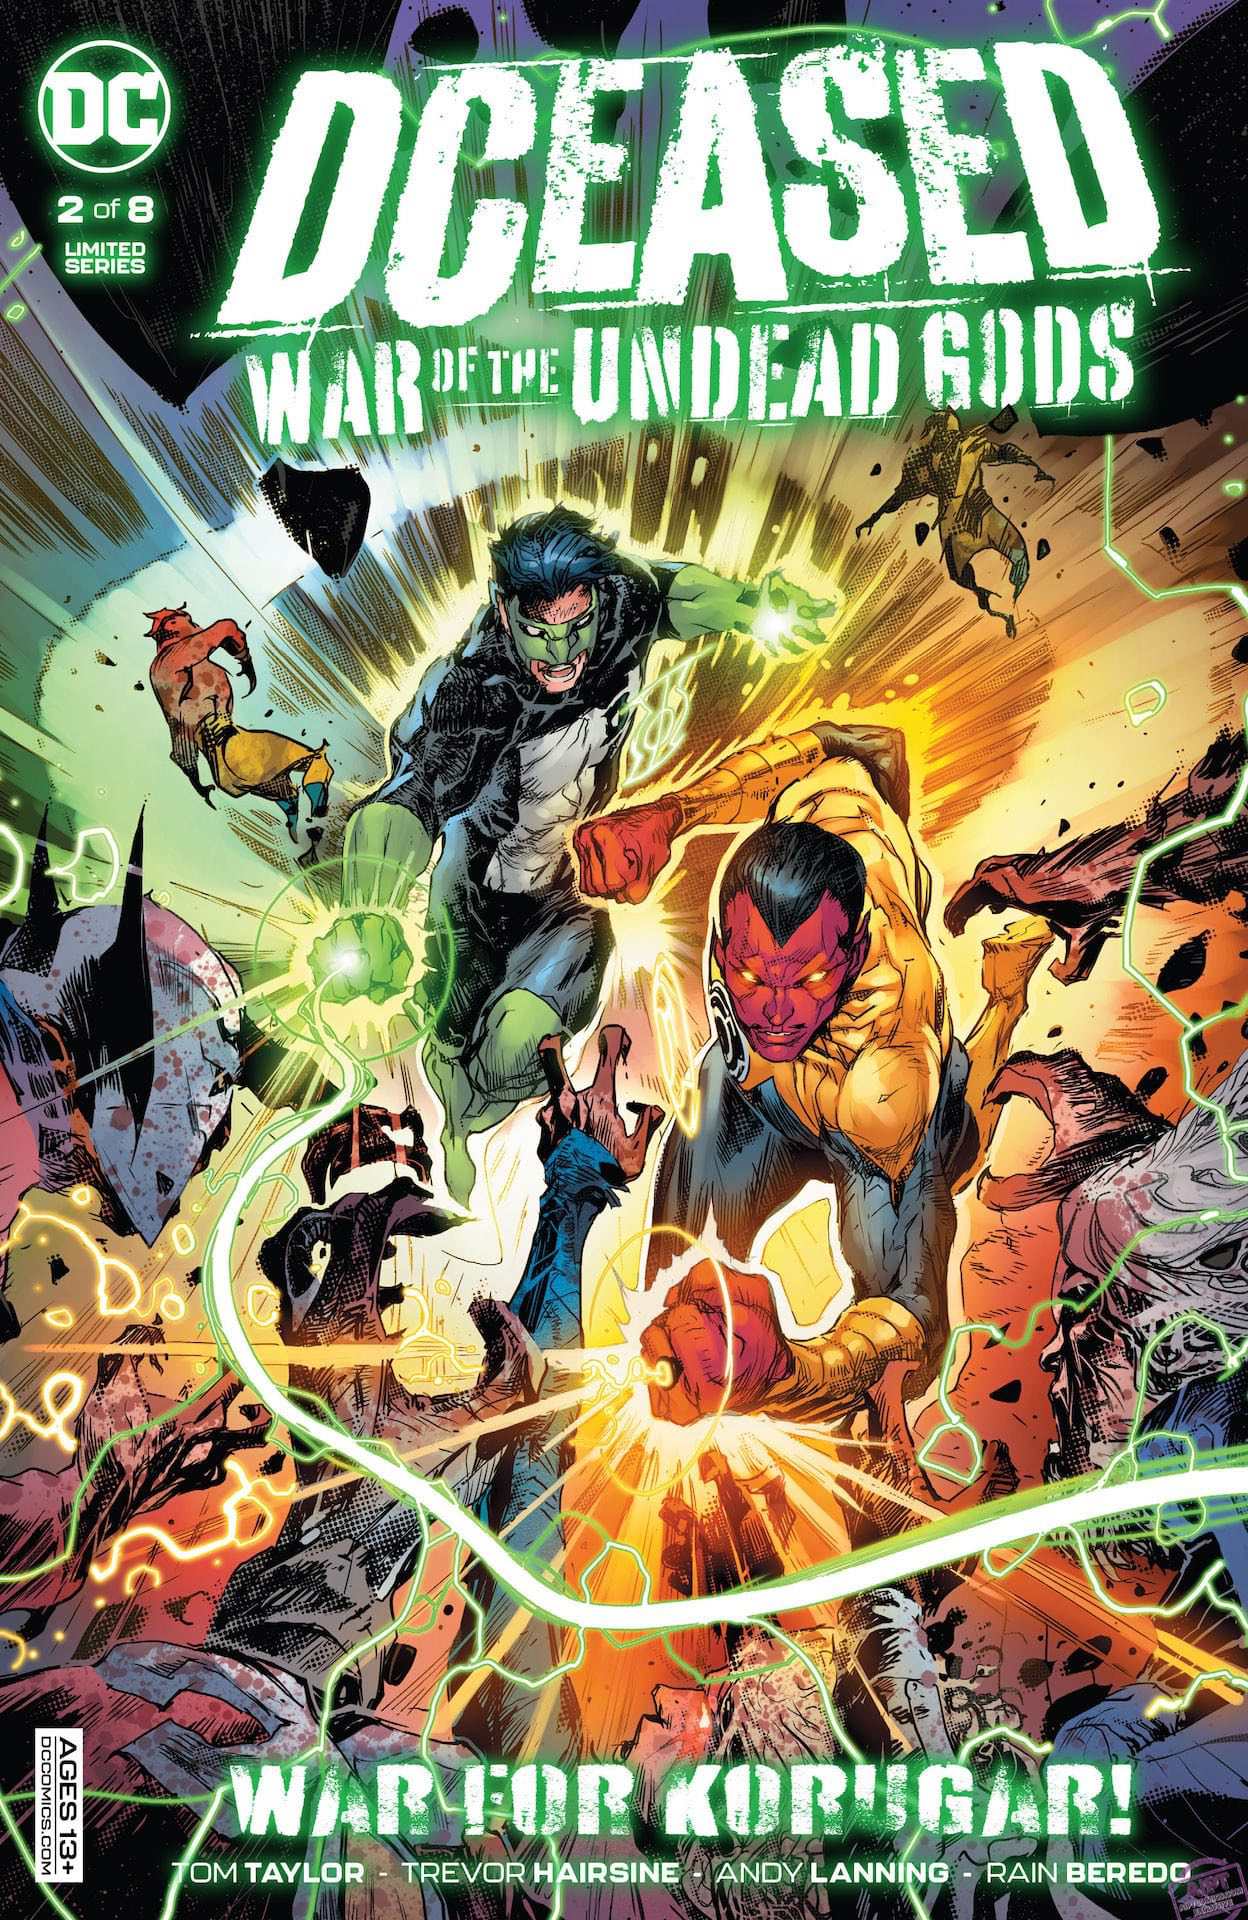 DC Preview: DCeased: War of the Undead Gods #2